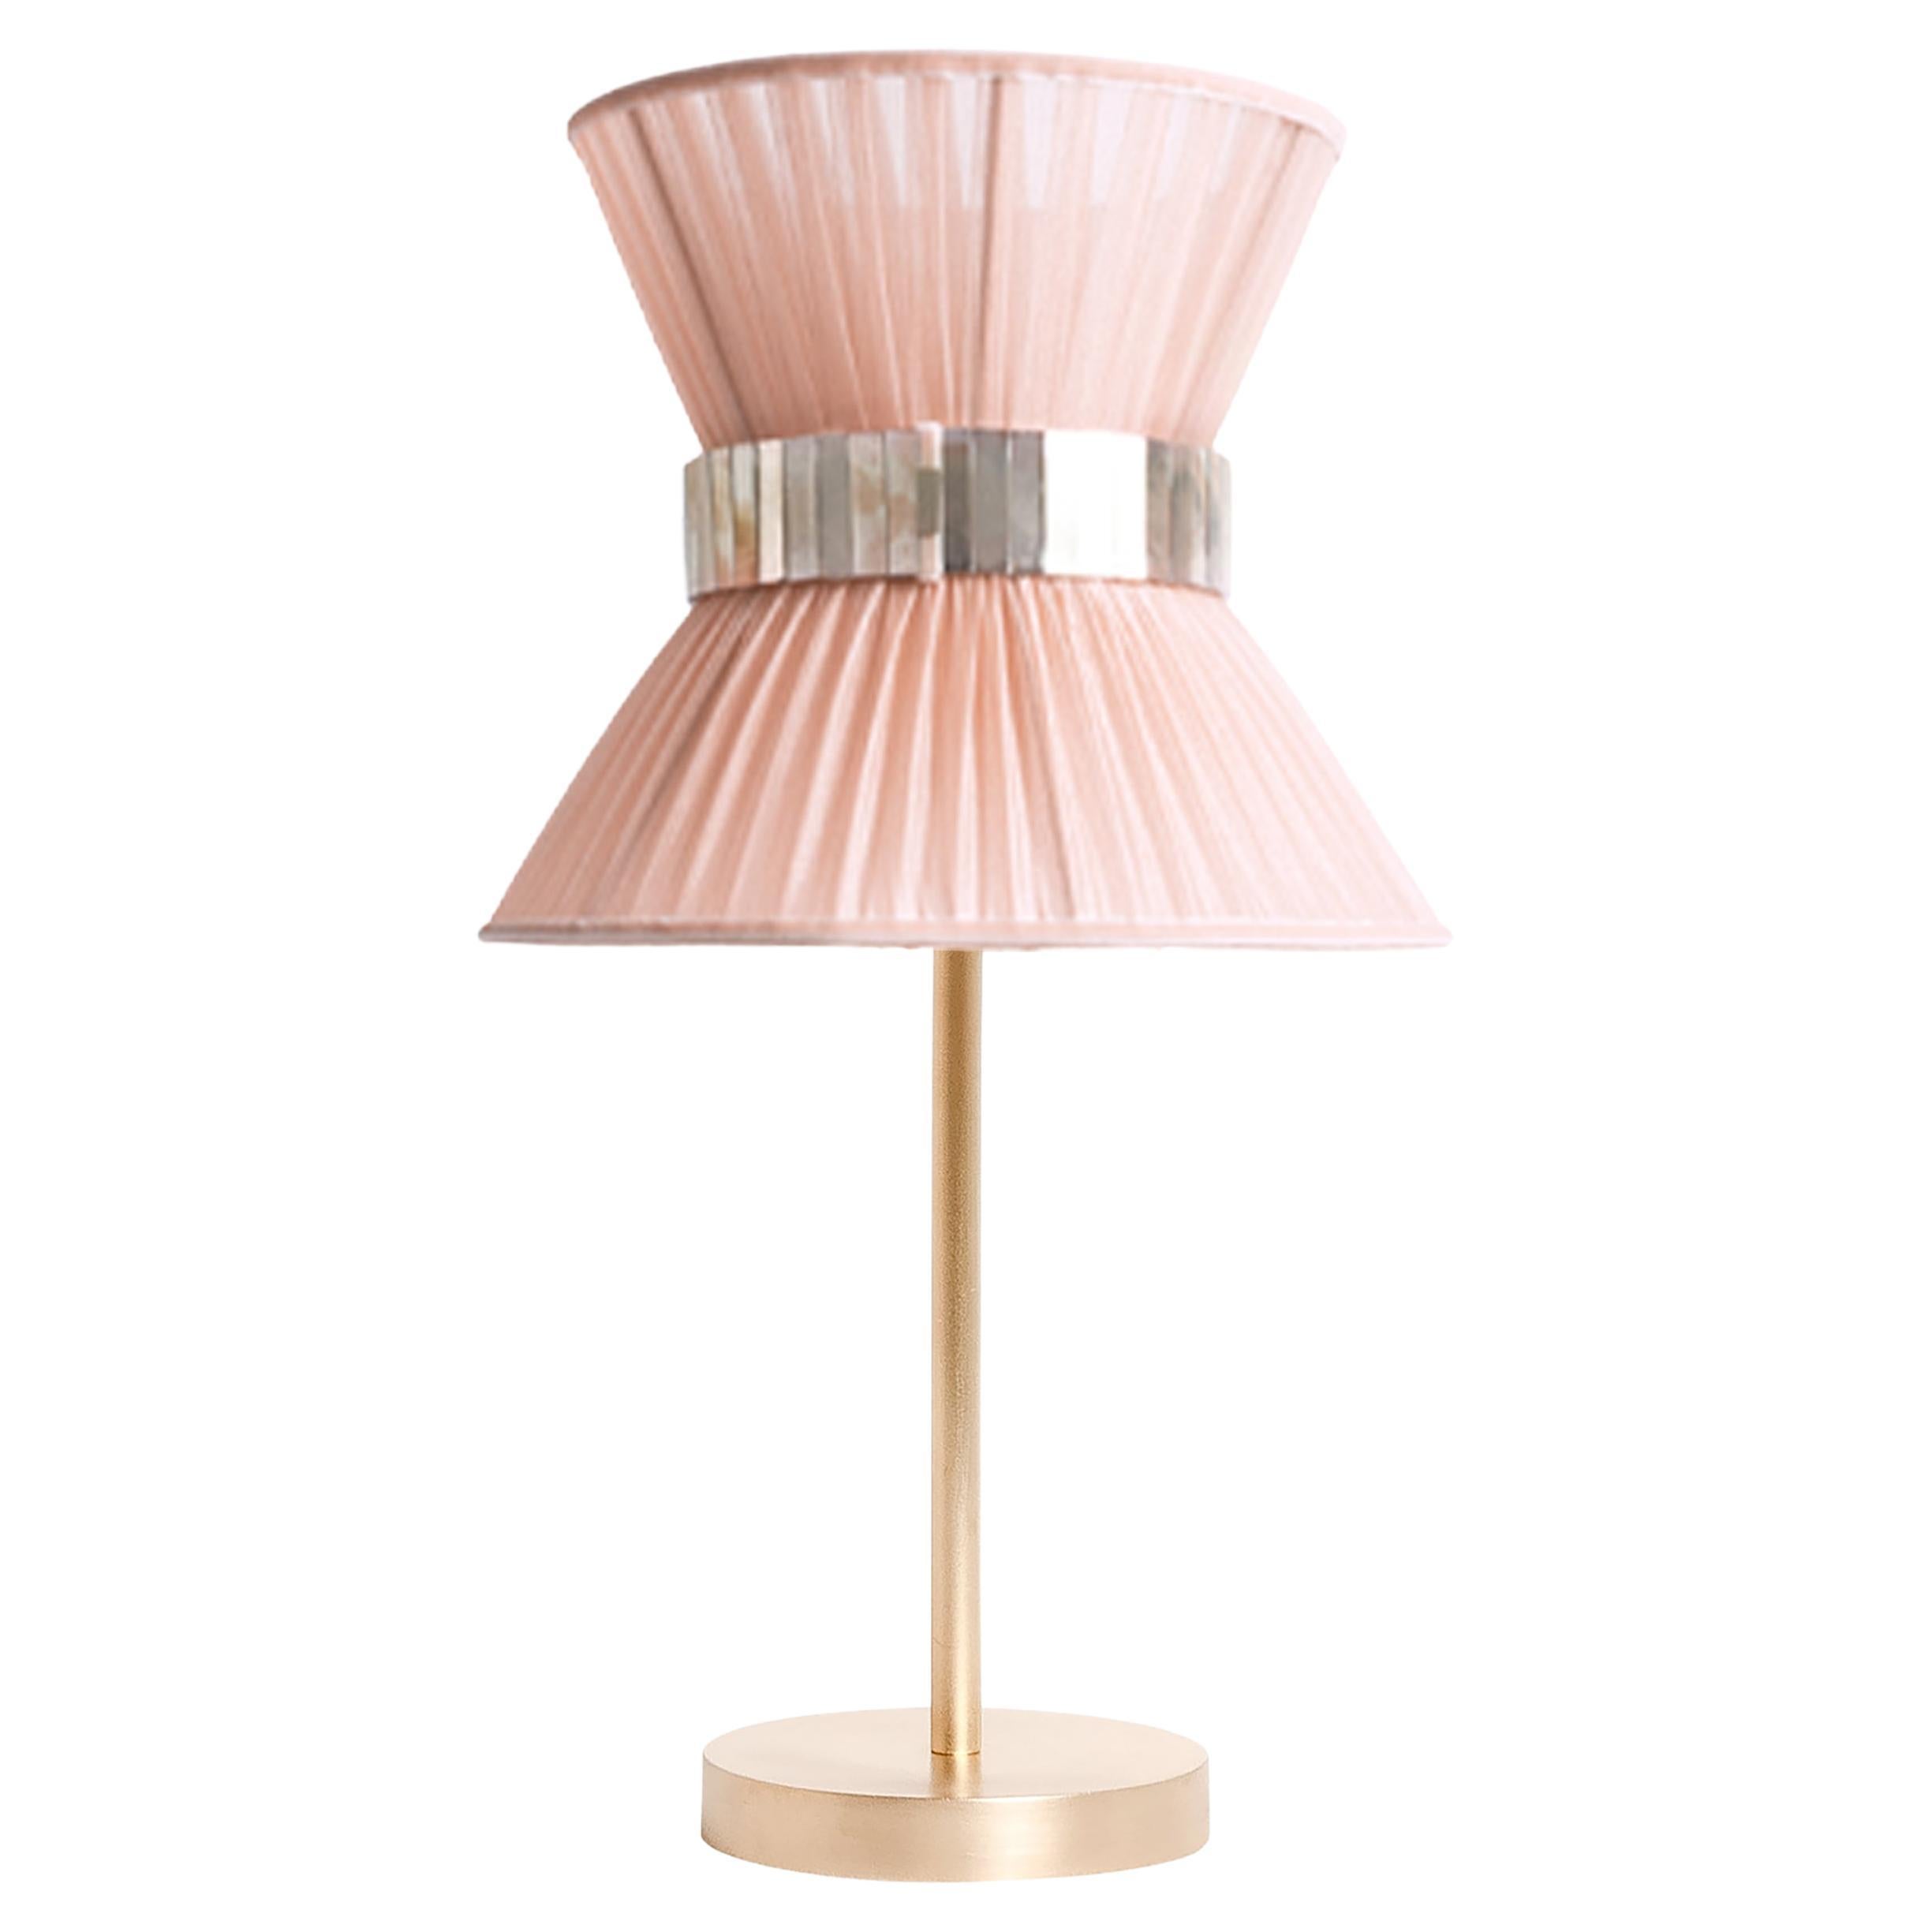 Tiffany Contemporary Table Lamp 23 Powder Silk, Brass, Silvered Glass